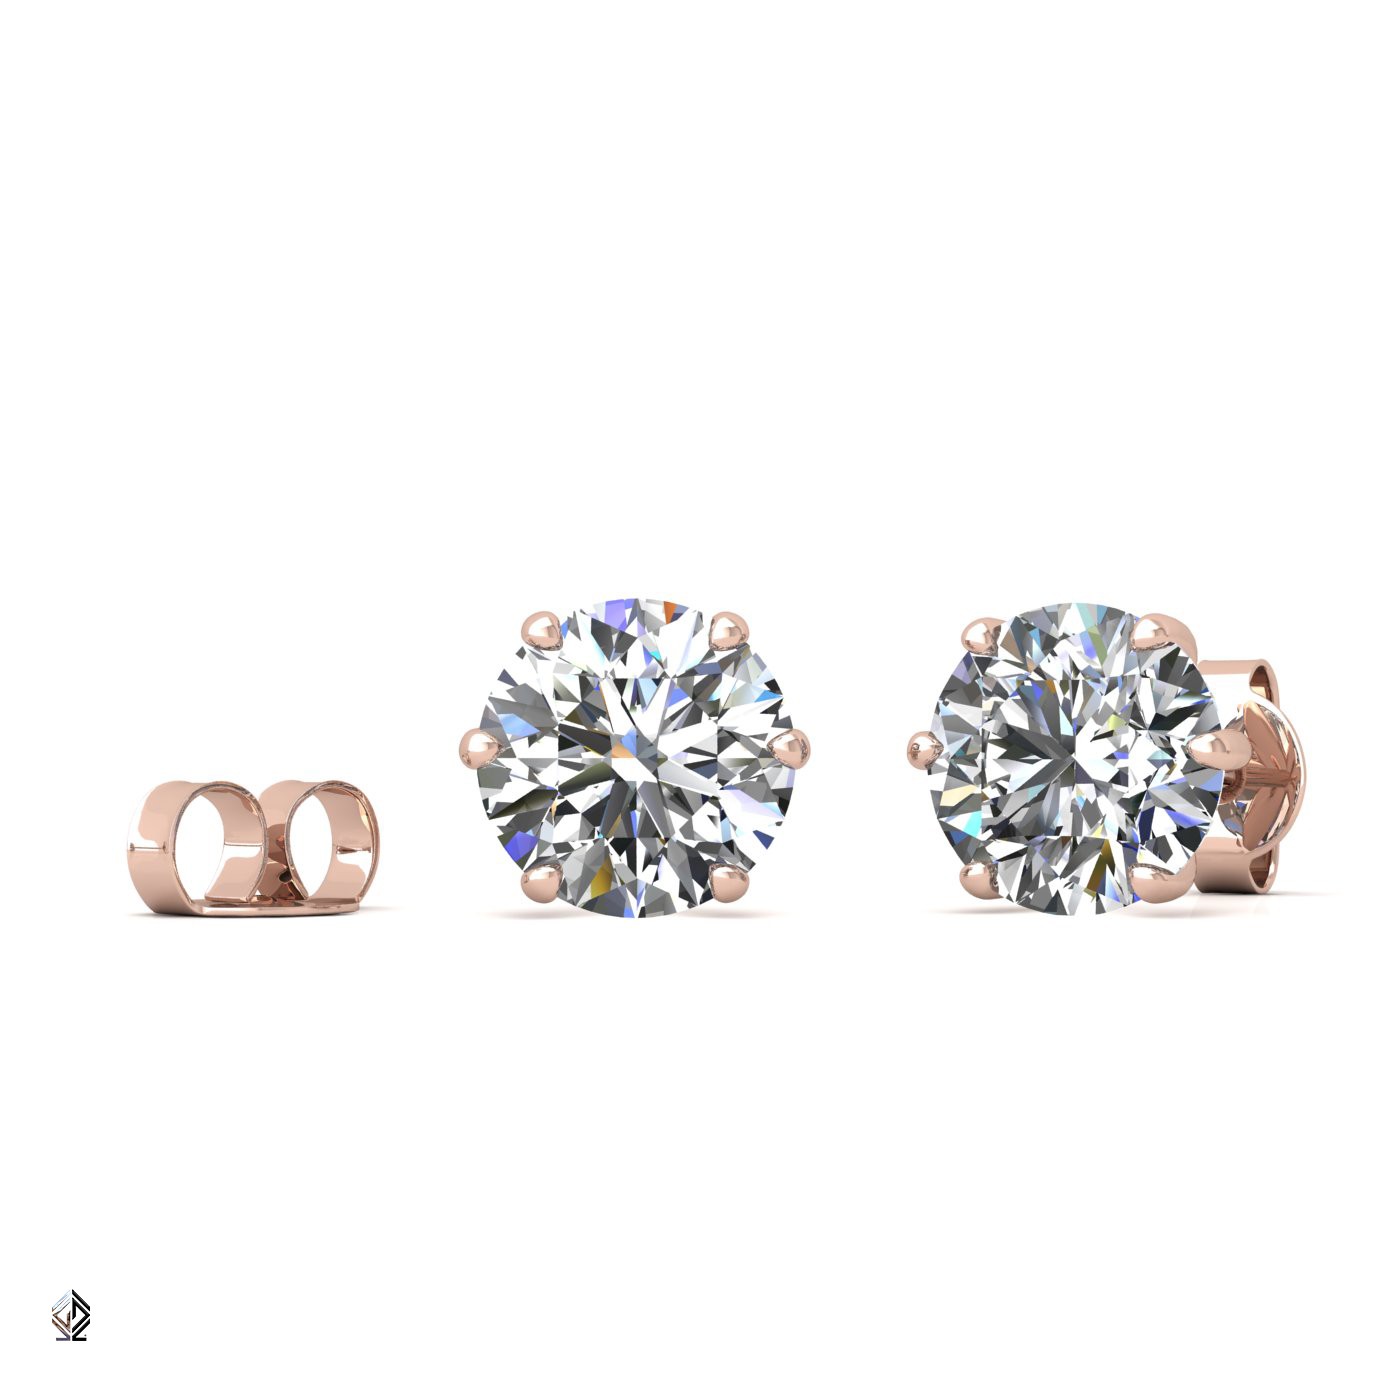 18k rose gold 1.0 ct each (2,0 tcw) 6 prongs round shape diamond earrings Photos & images